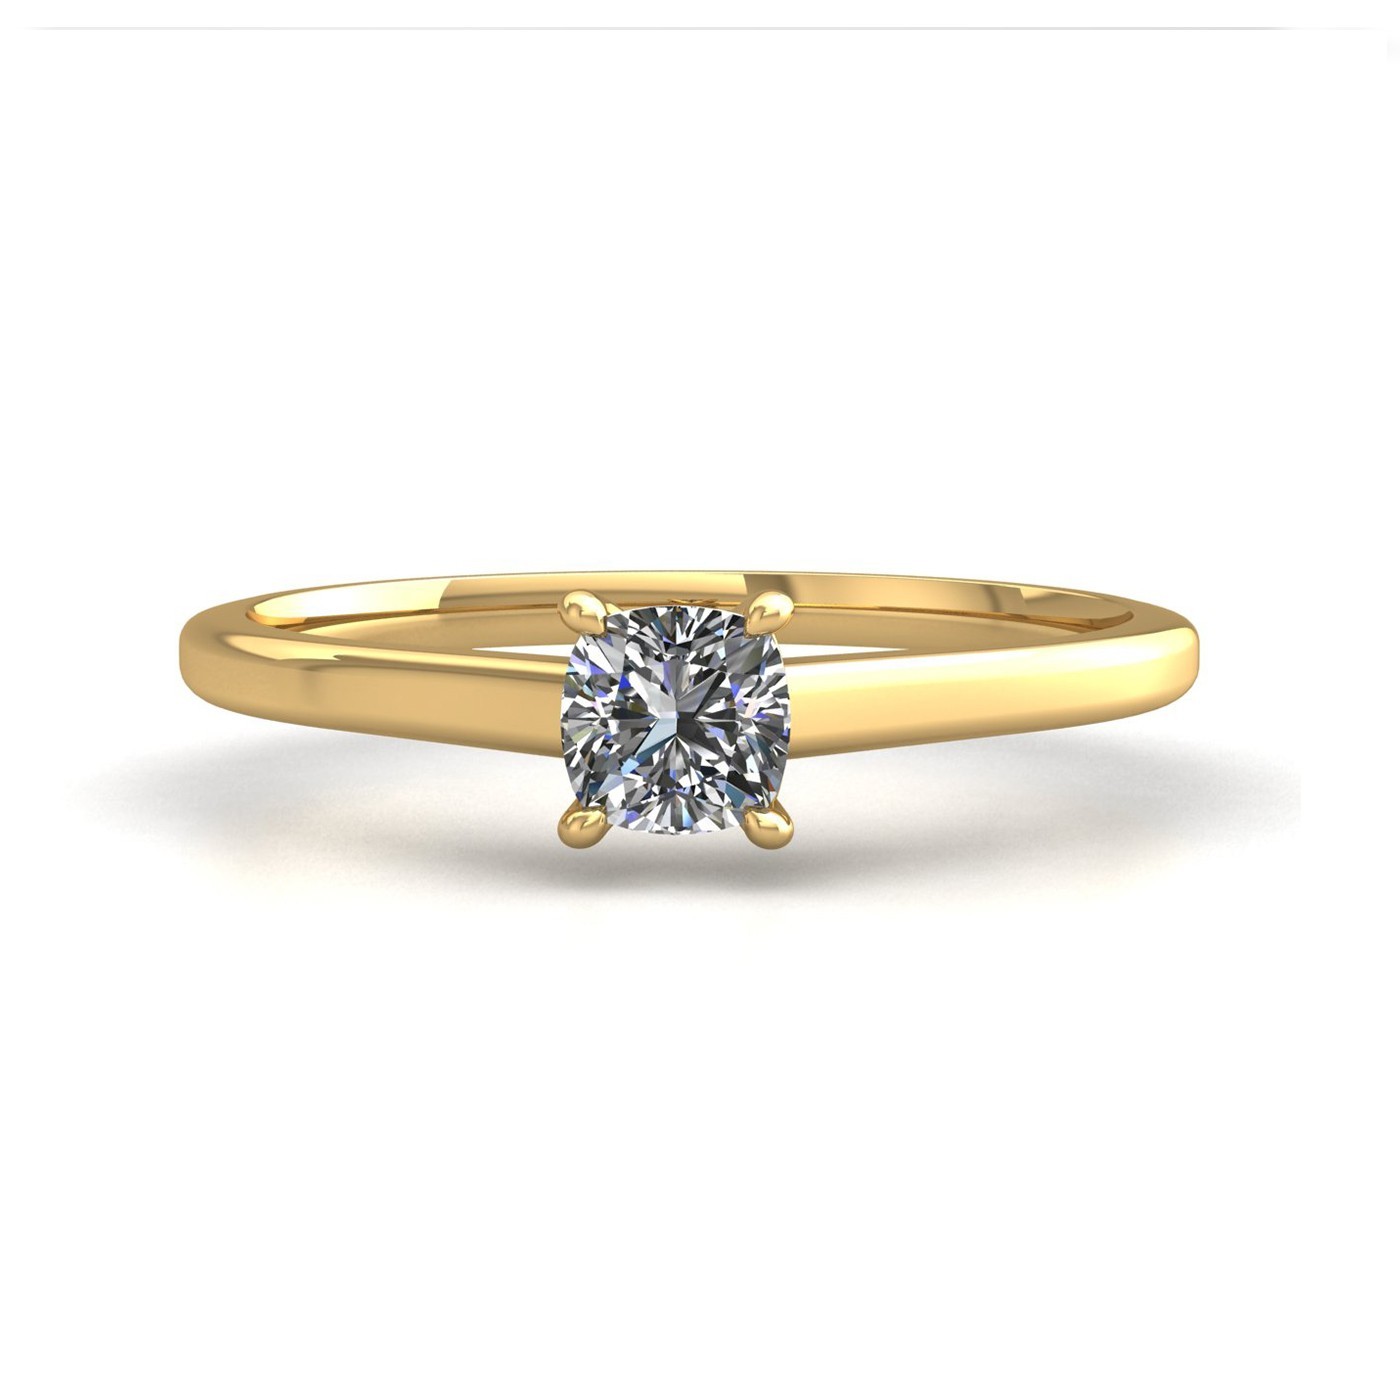 18k yellow gold 1.0ct 4 prongs solitaire cushion cut diamond engagement ring with whisper thin band Photos & images